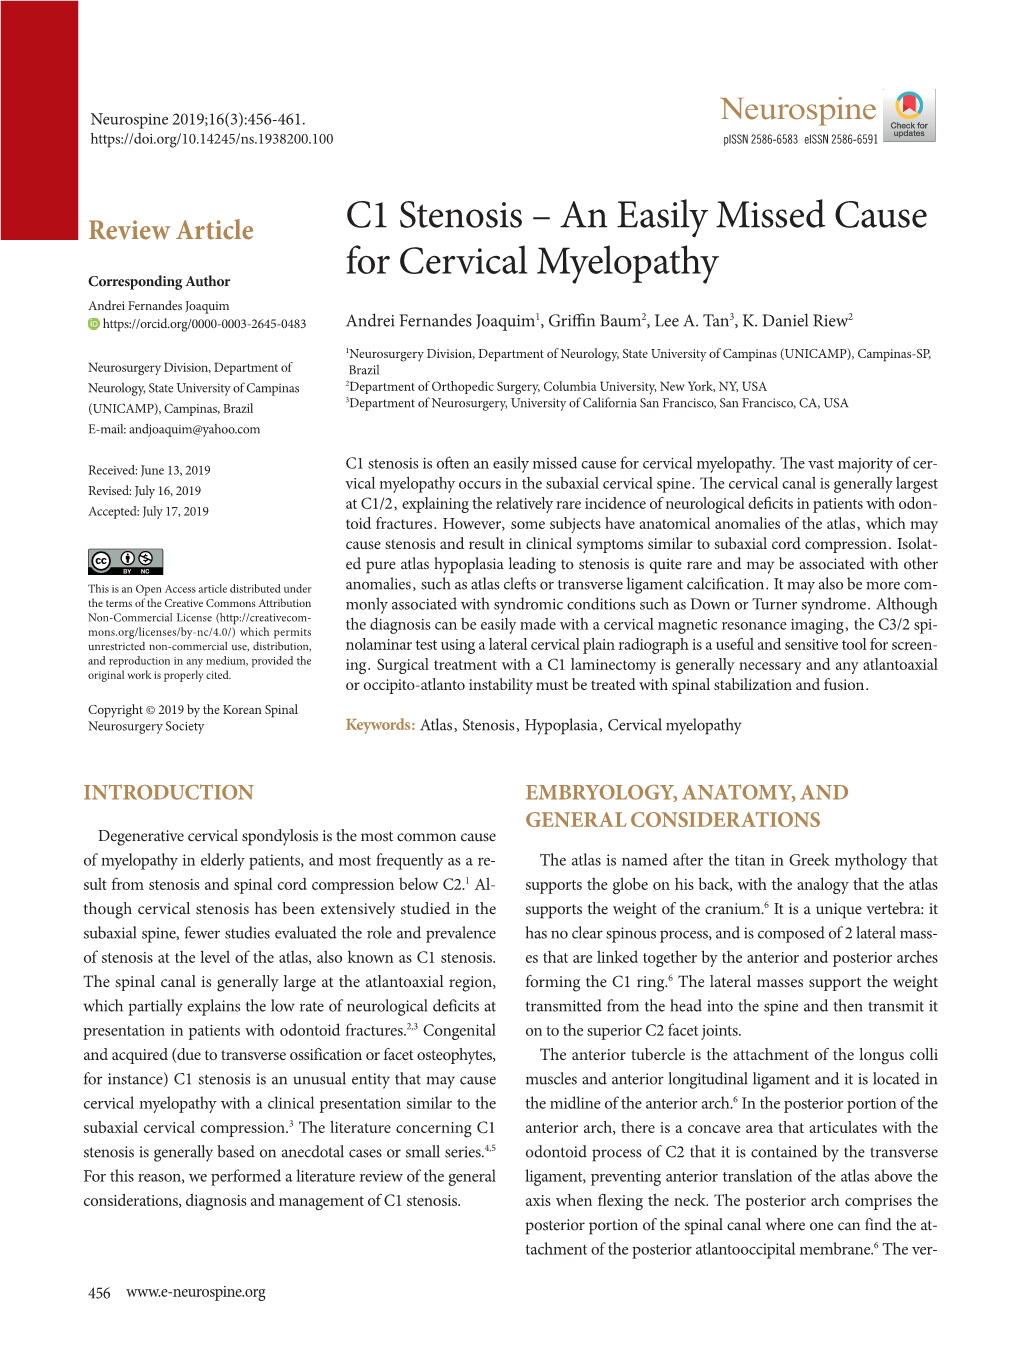 C1 Stenosis – an Easily Missed Cause for Cervical Myelopathy